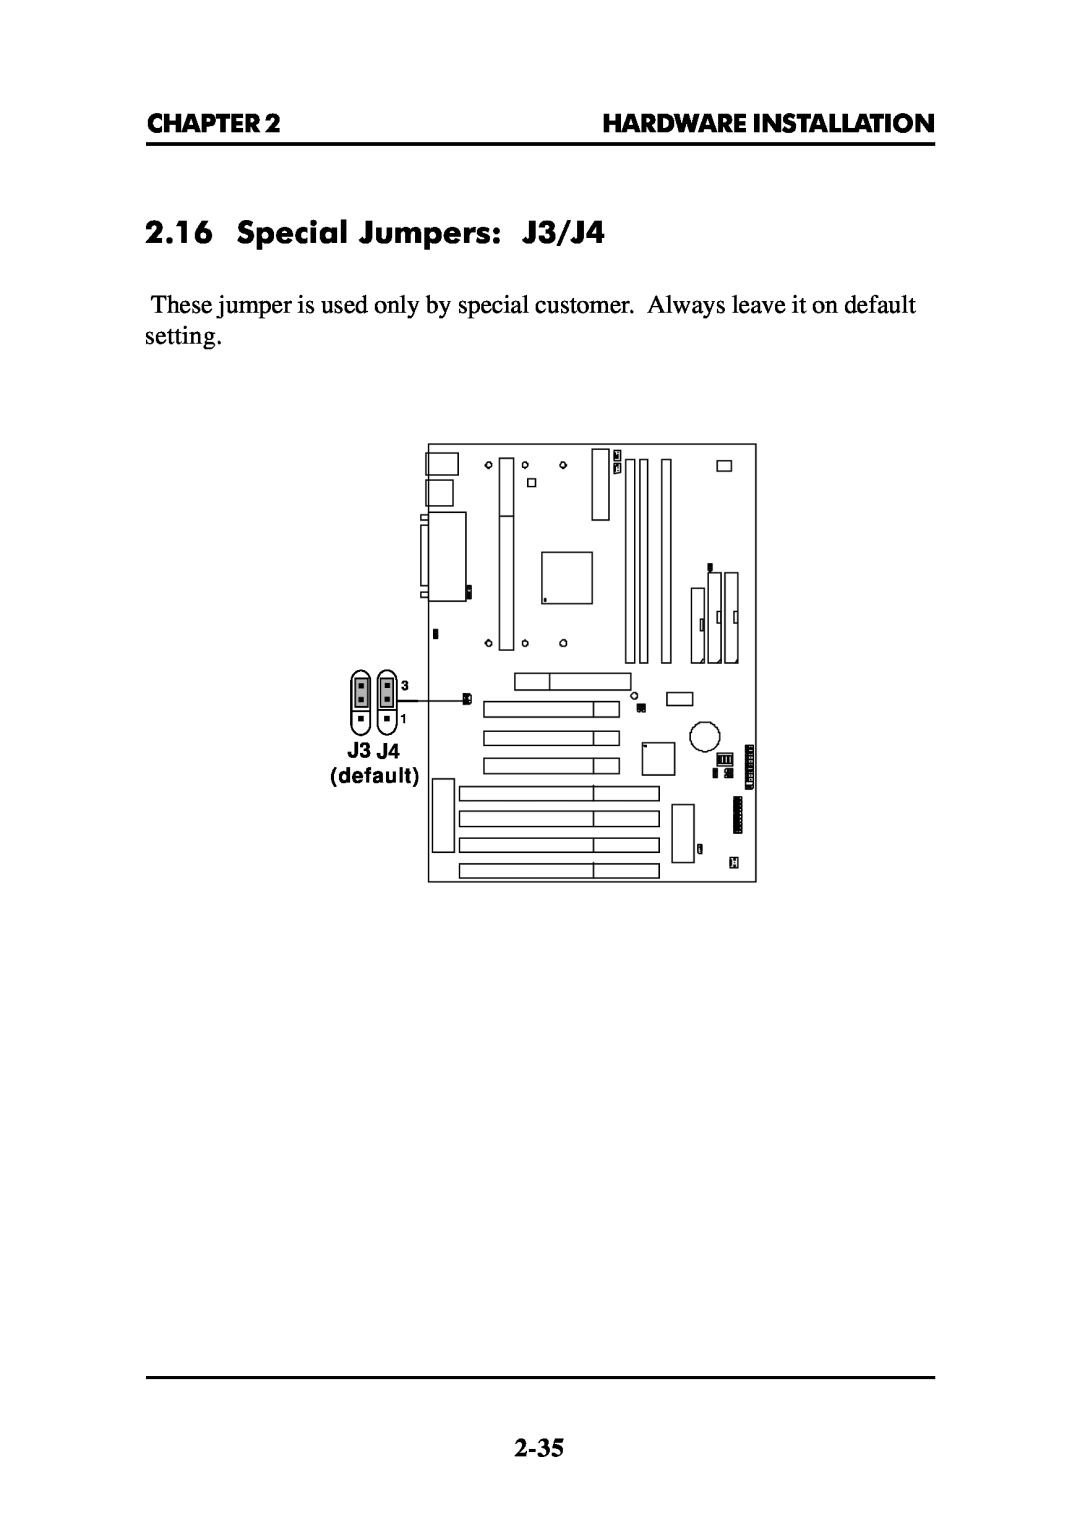 Intel MS-6112 manual Special Jumpers J3/J4, Chapter, Hardware Installation 